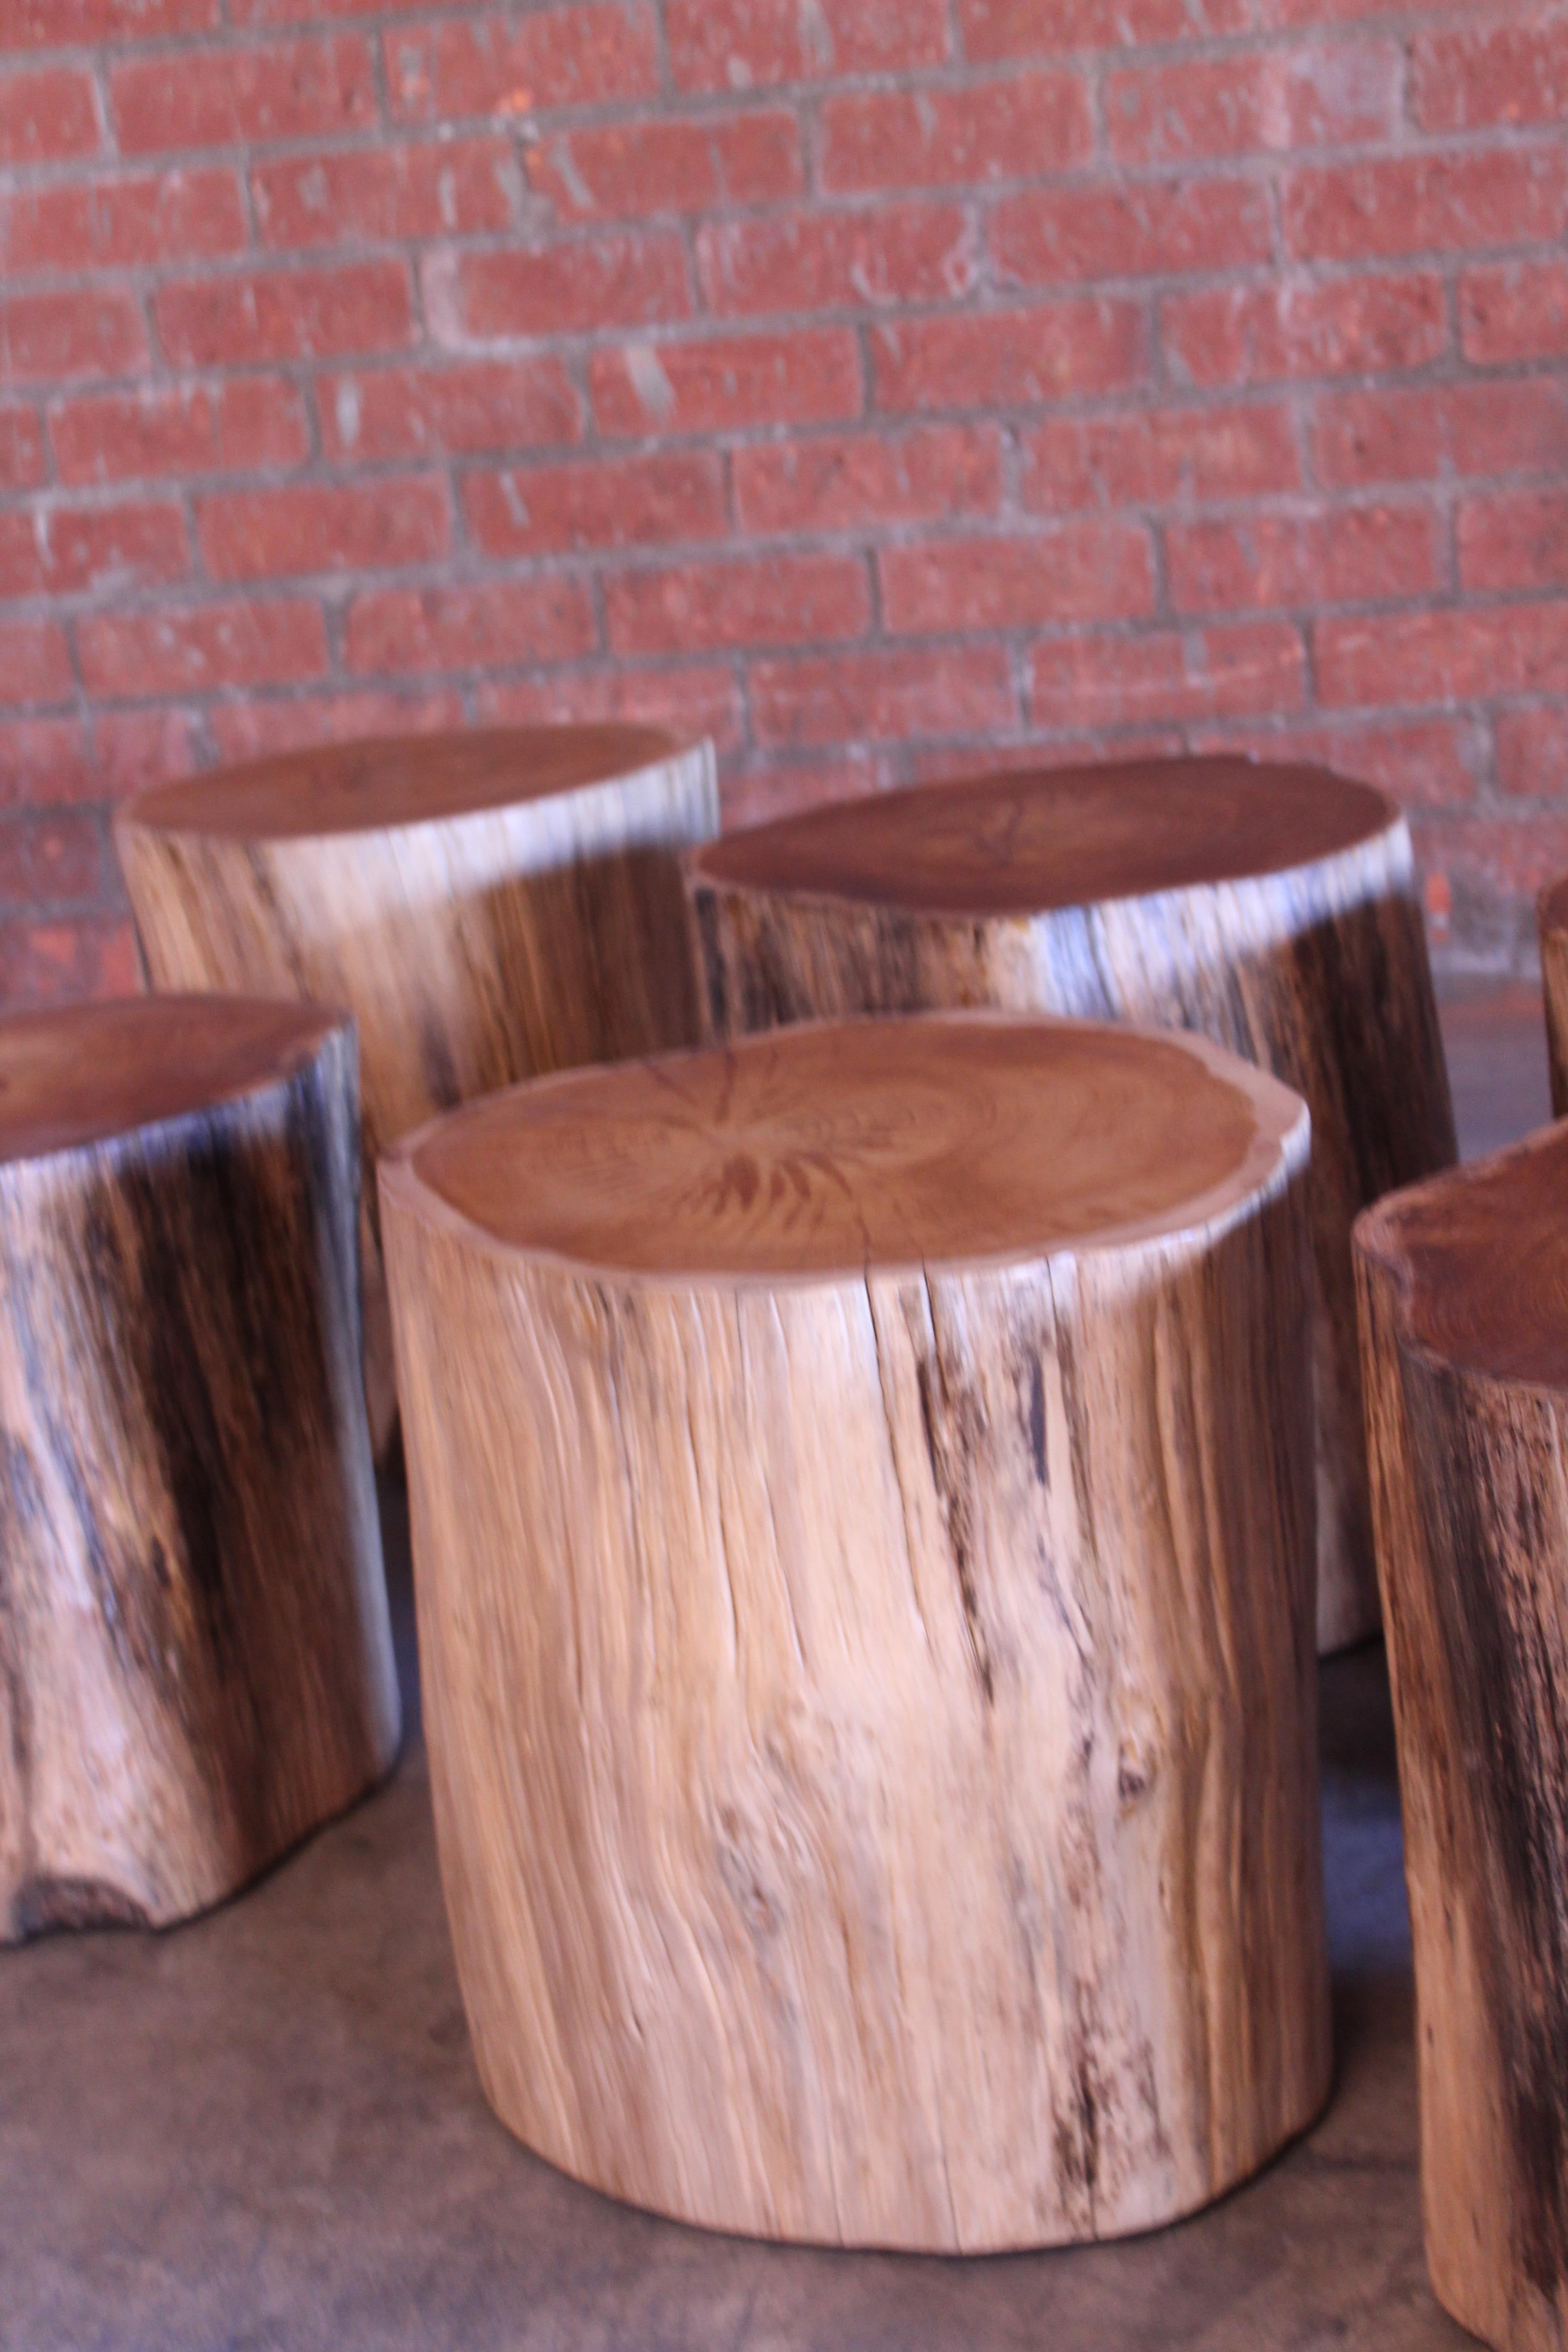 Indonesian Solid Teak Wood Stump Side Tables. Two Avail, Sold Individually